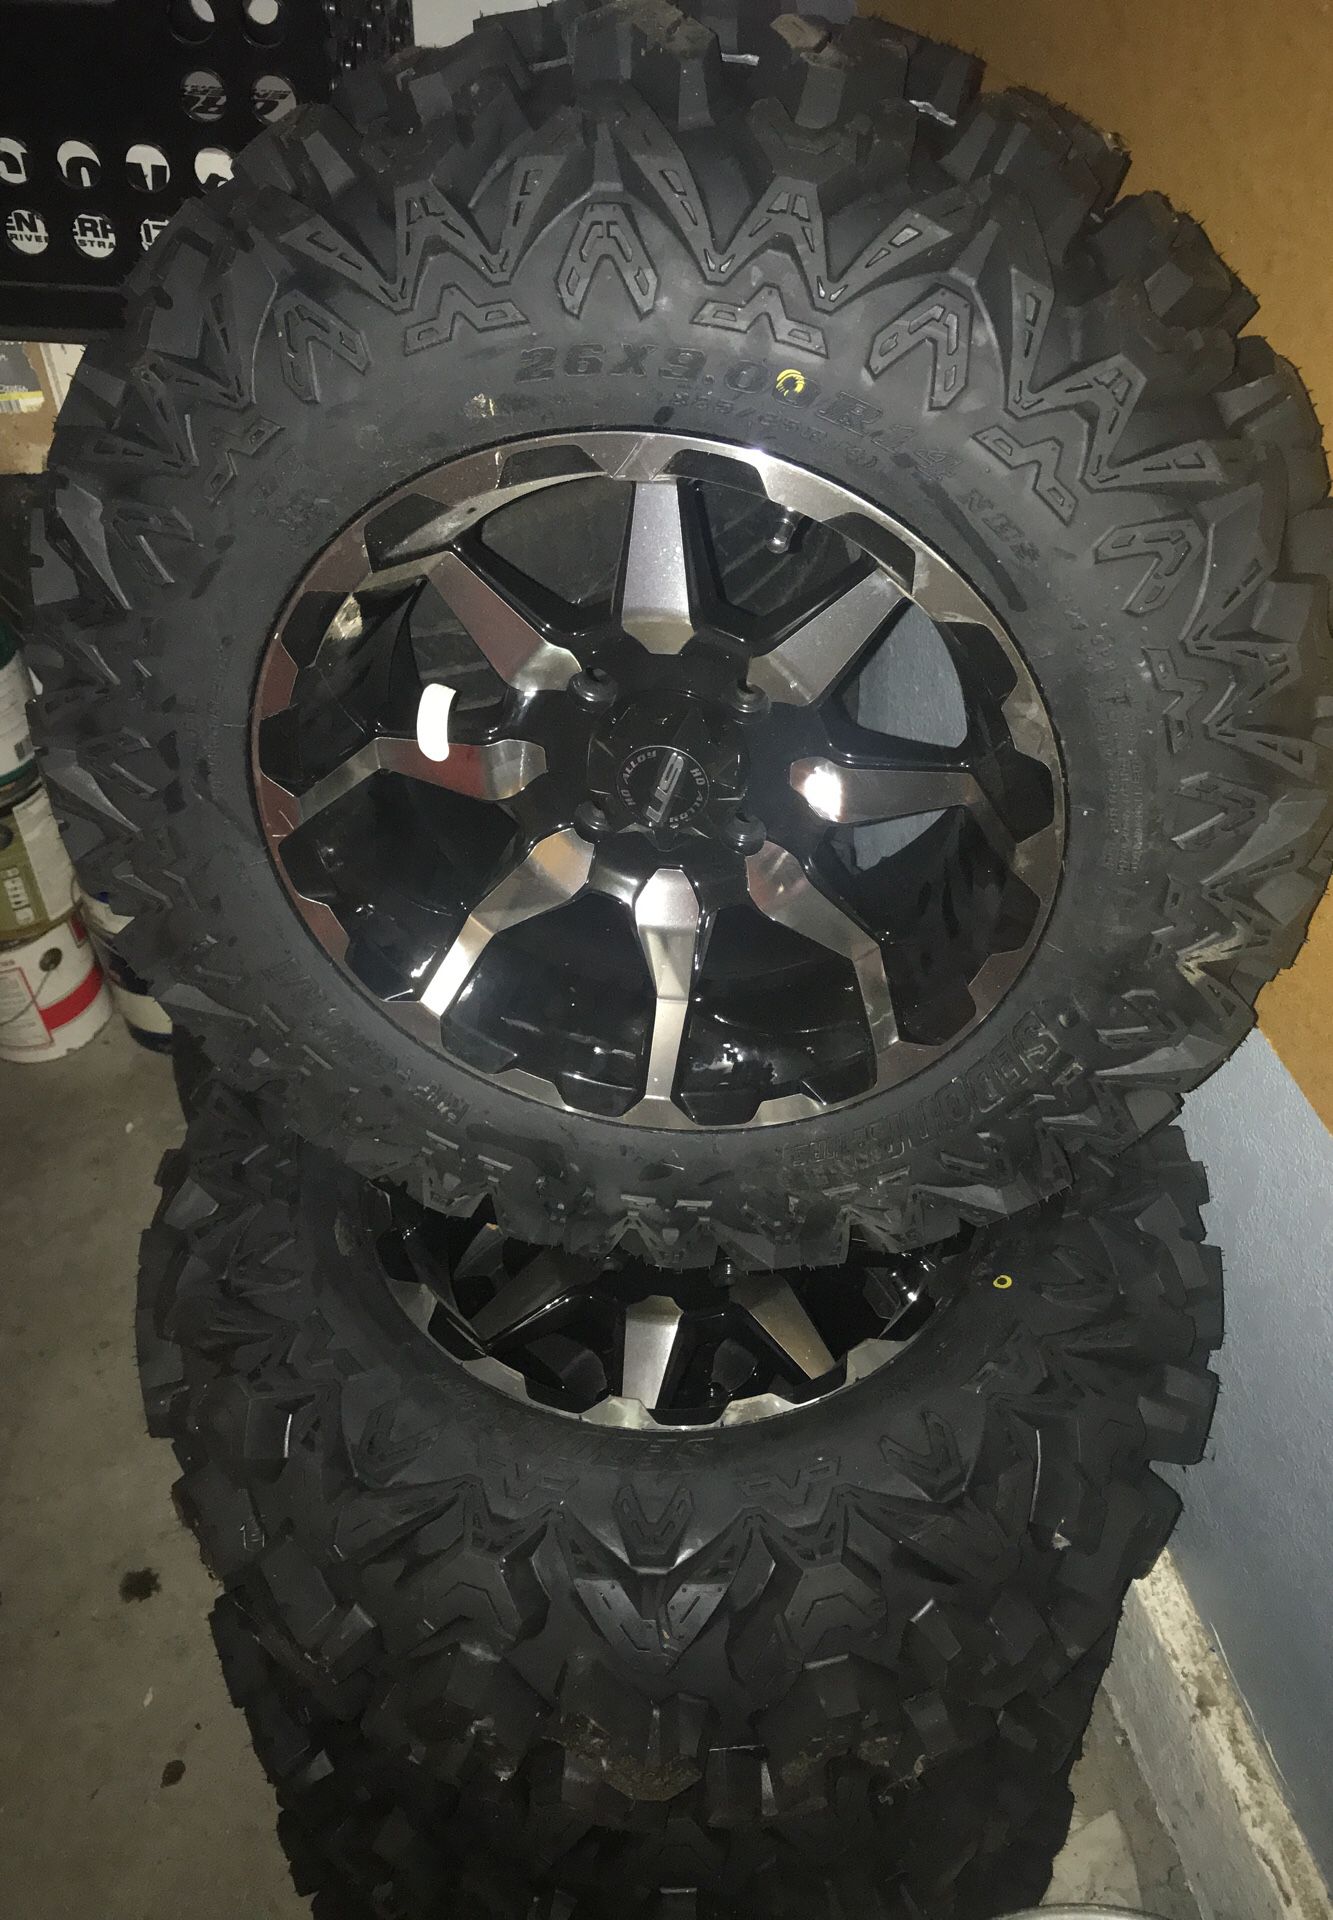 Brand new wheels for side-by-side Yamaha Polaris